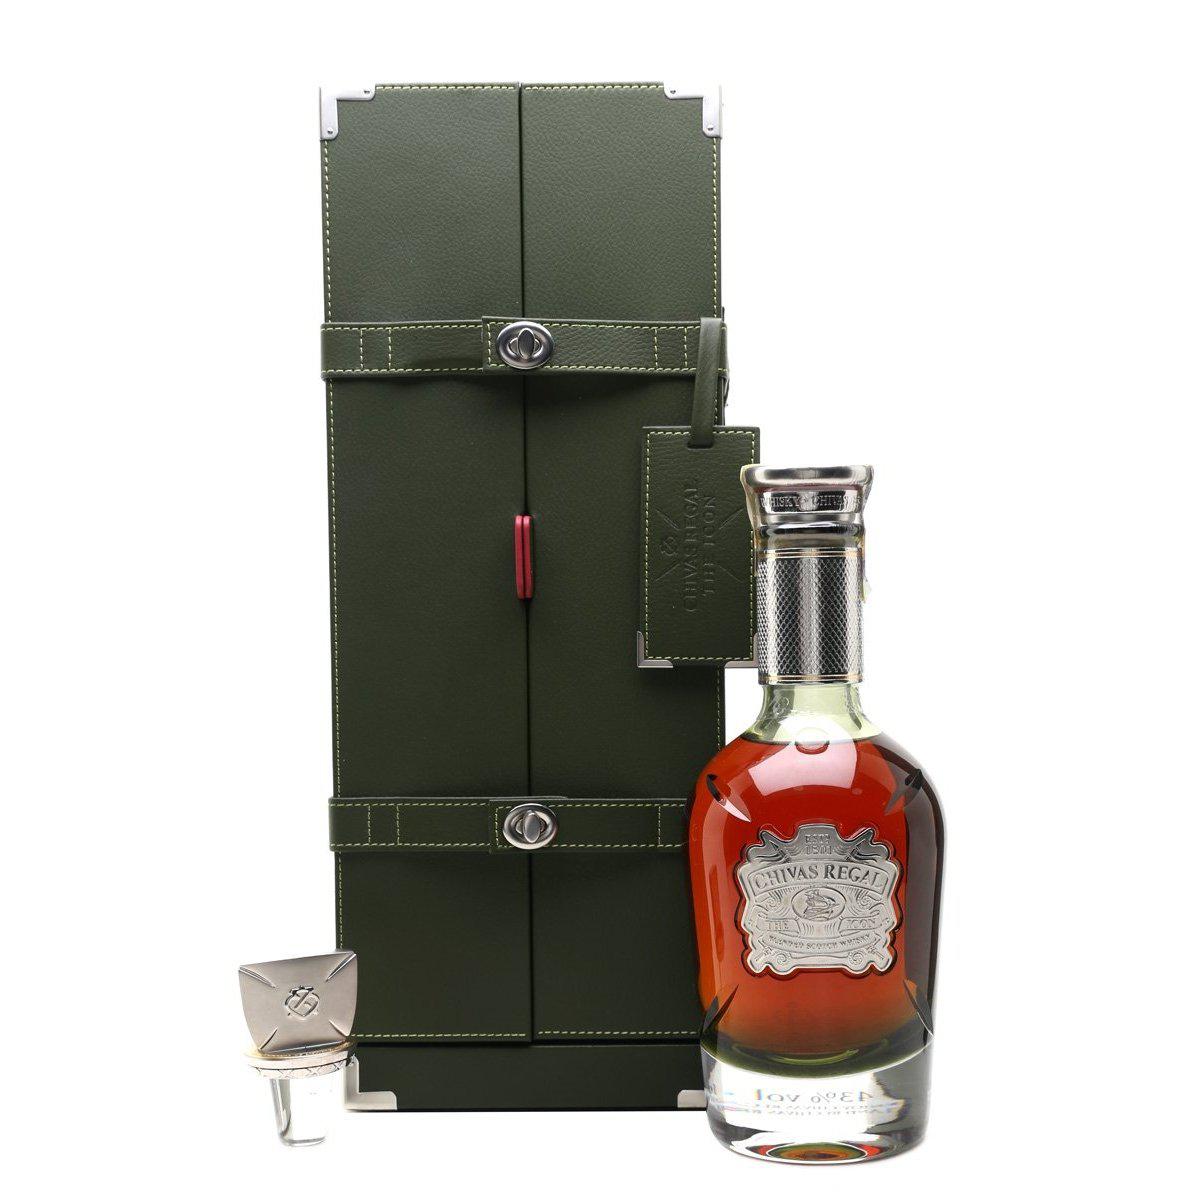 Chivas Regal The Icon Limited Edition Scotch Whisky 700ml